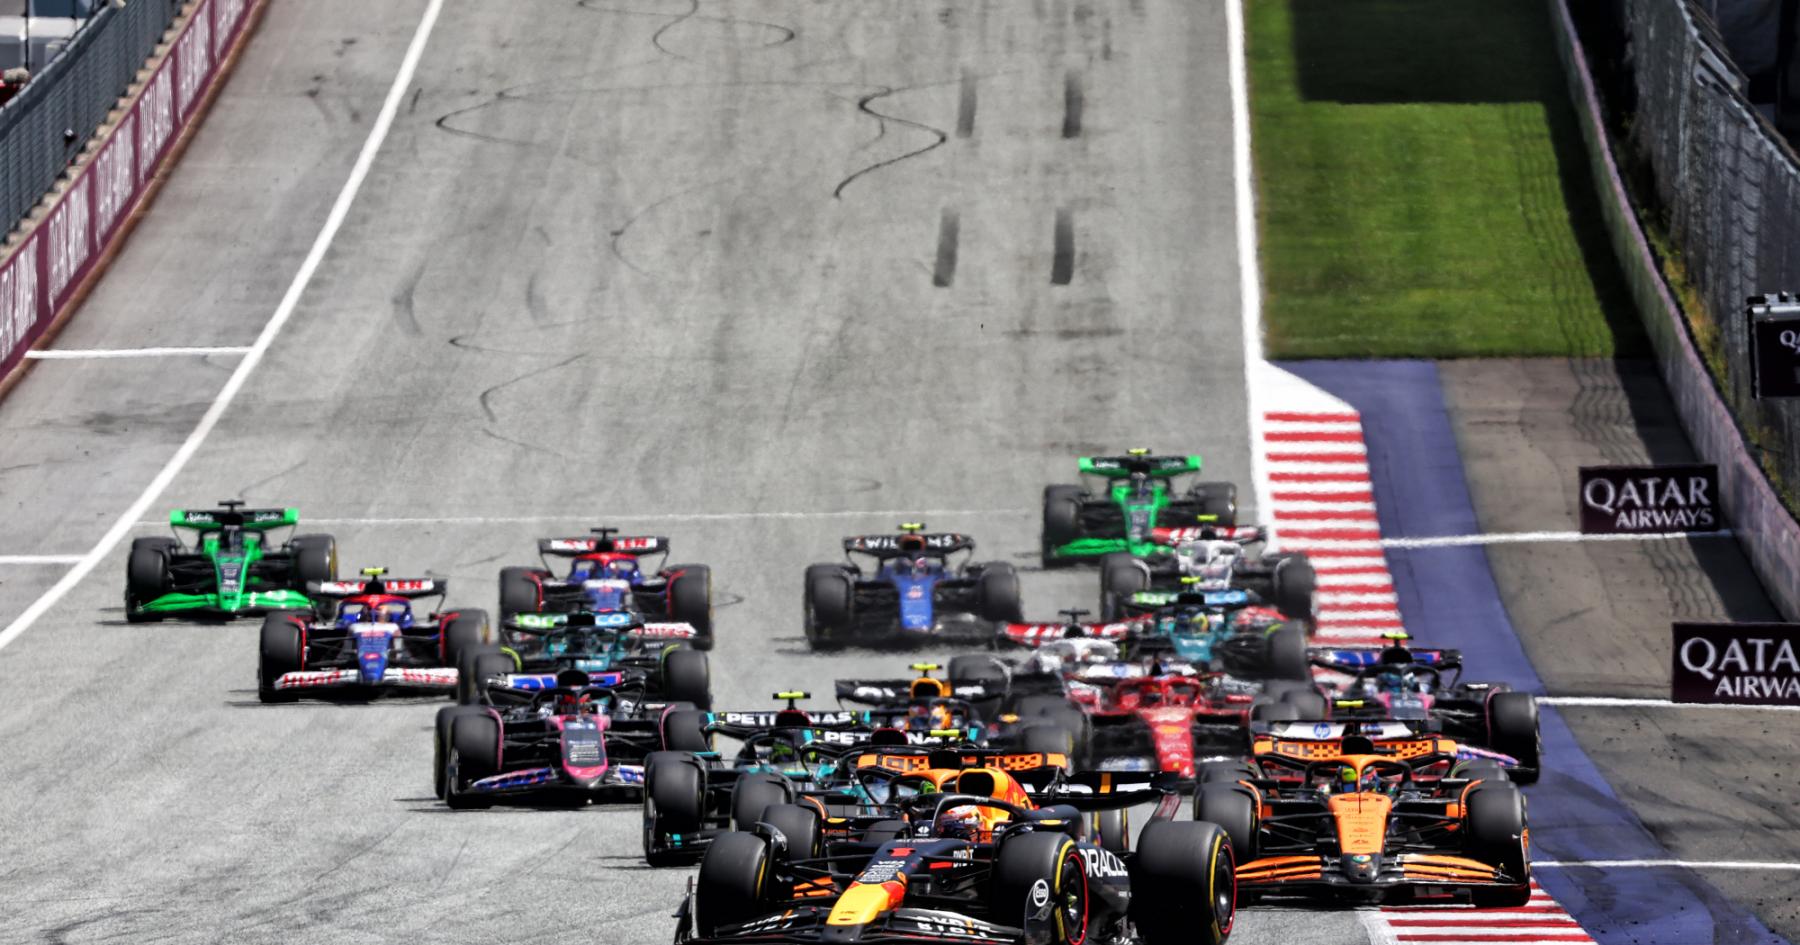 Revving Up Excitement: Cast Your Vote for the Next F1 Sprint Venue!